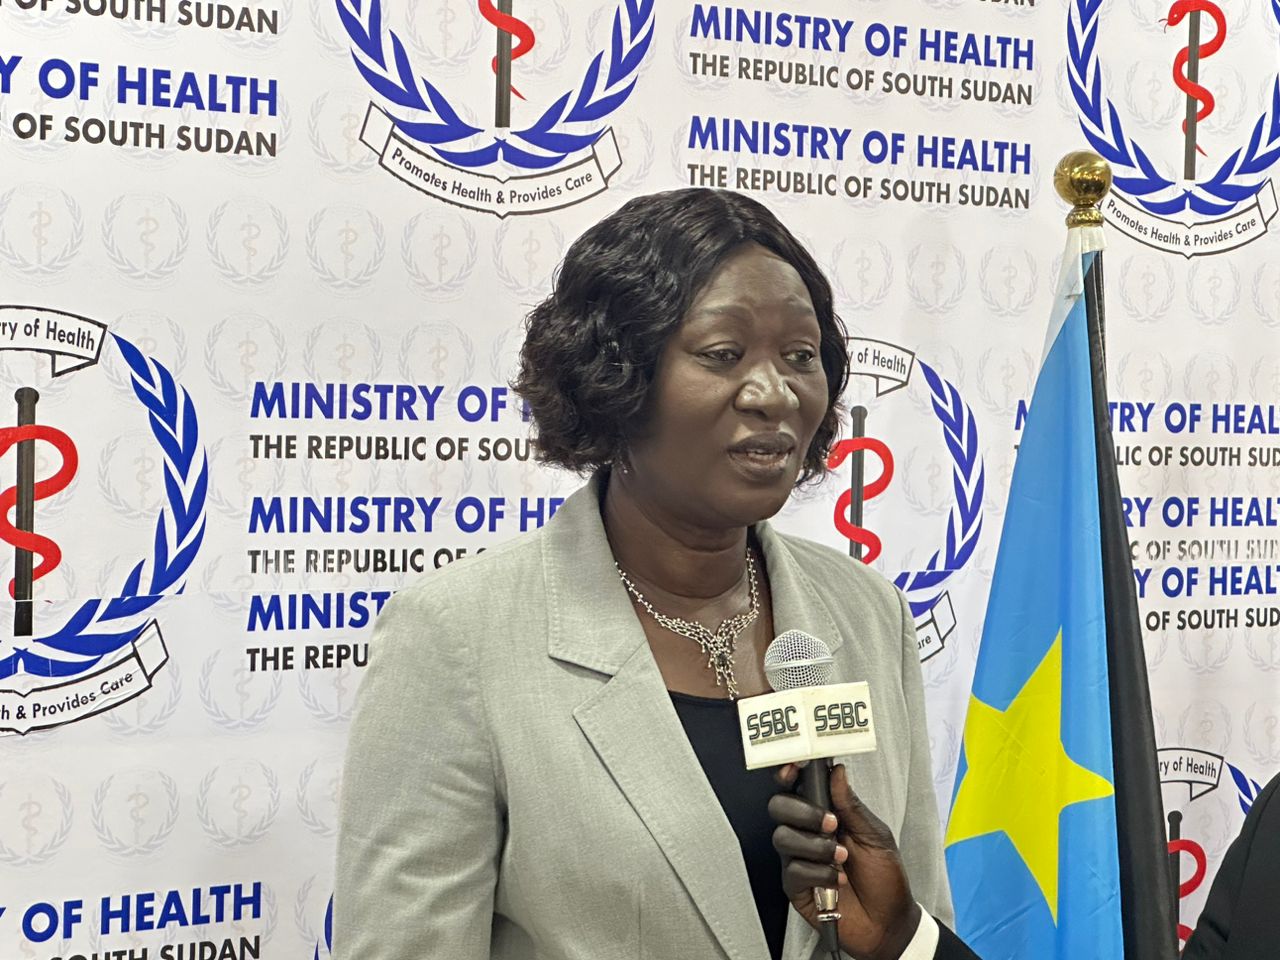 South Sudan Ministry of Health Strengthens Partnerships with Global Fund and GAVI